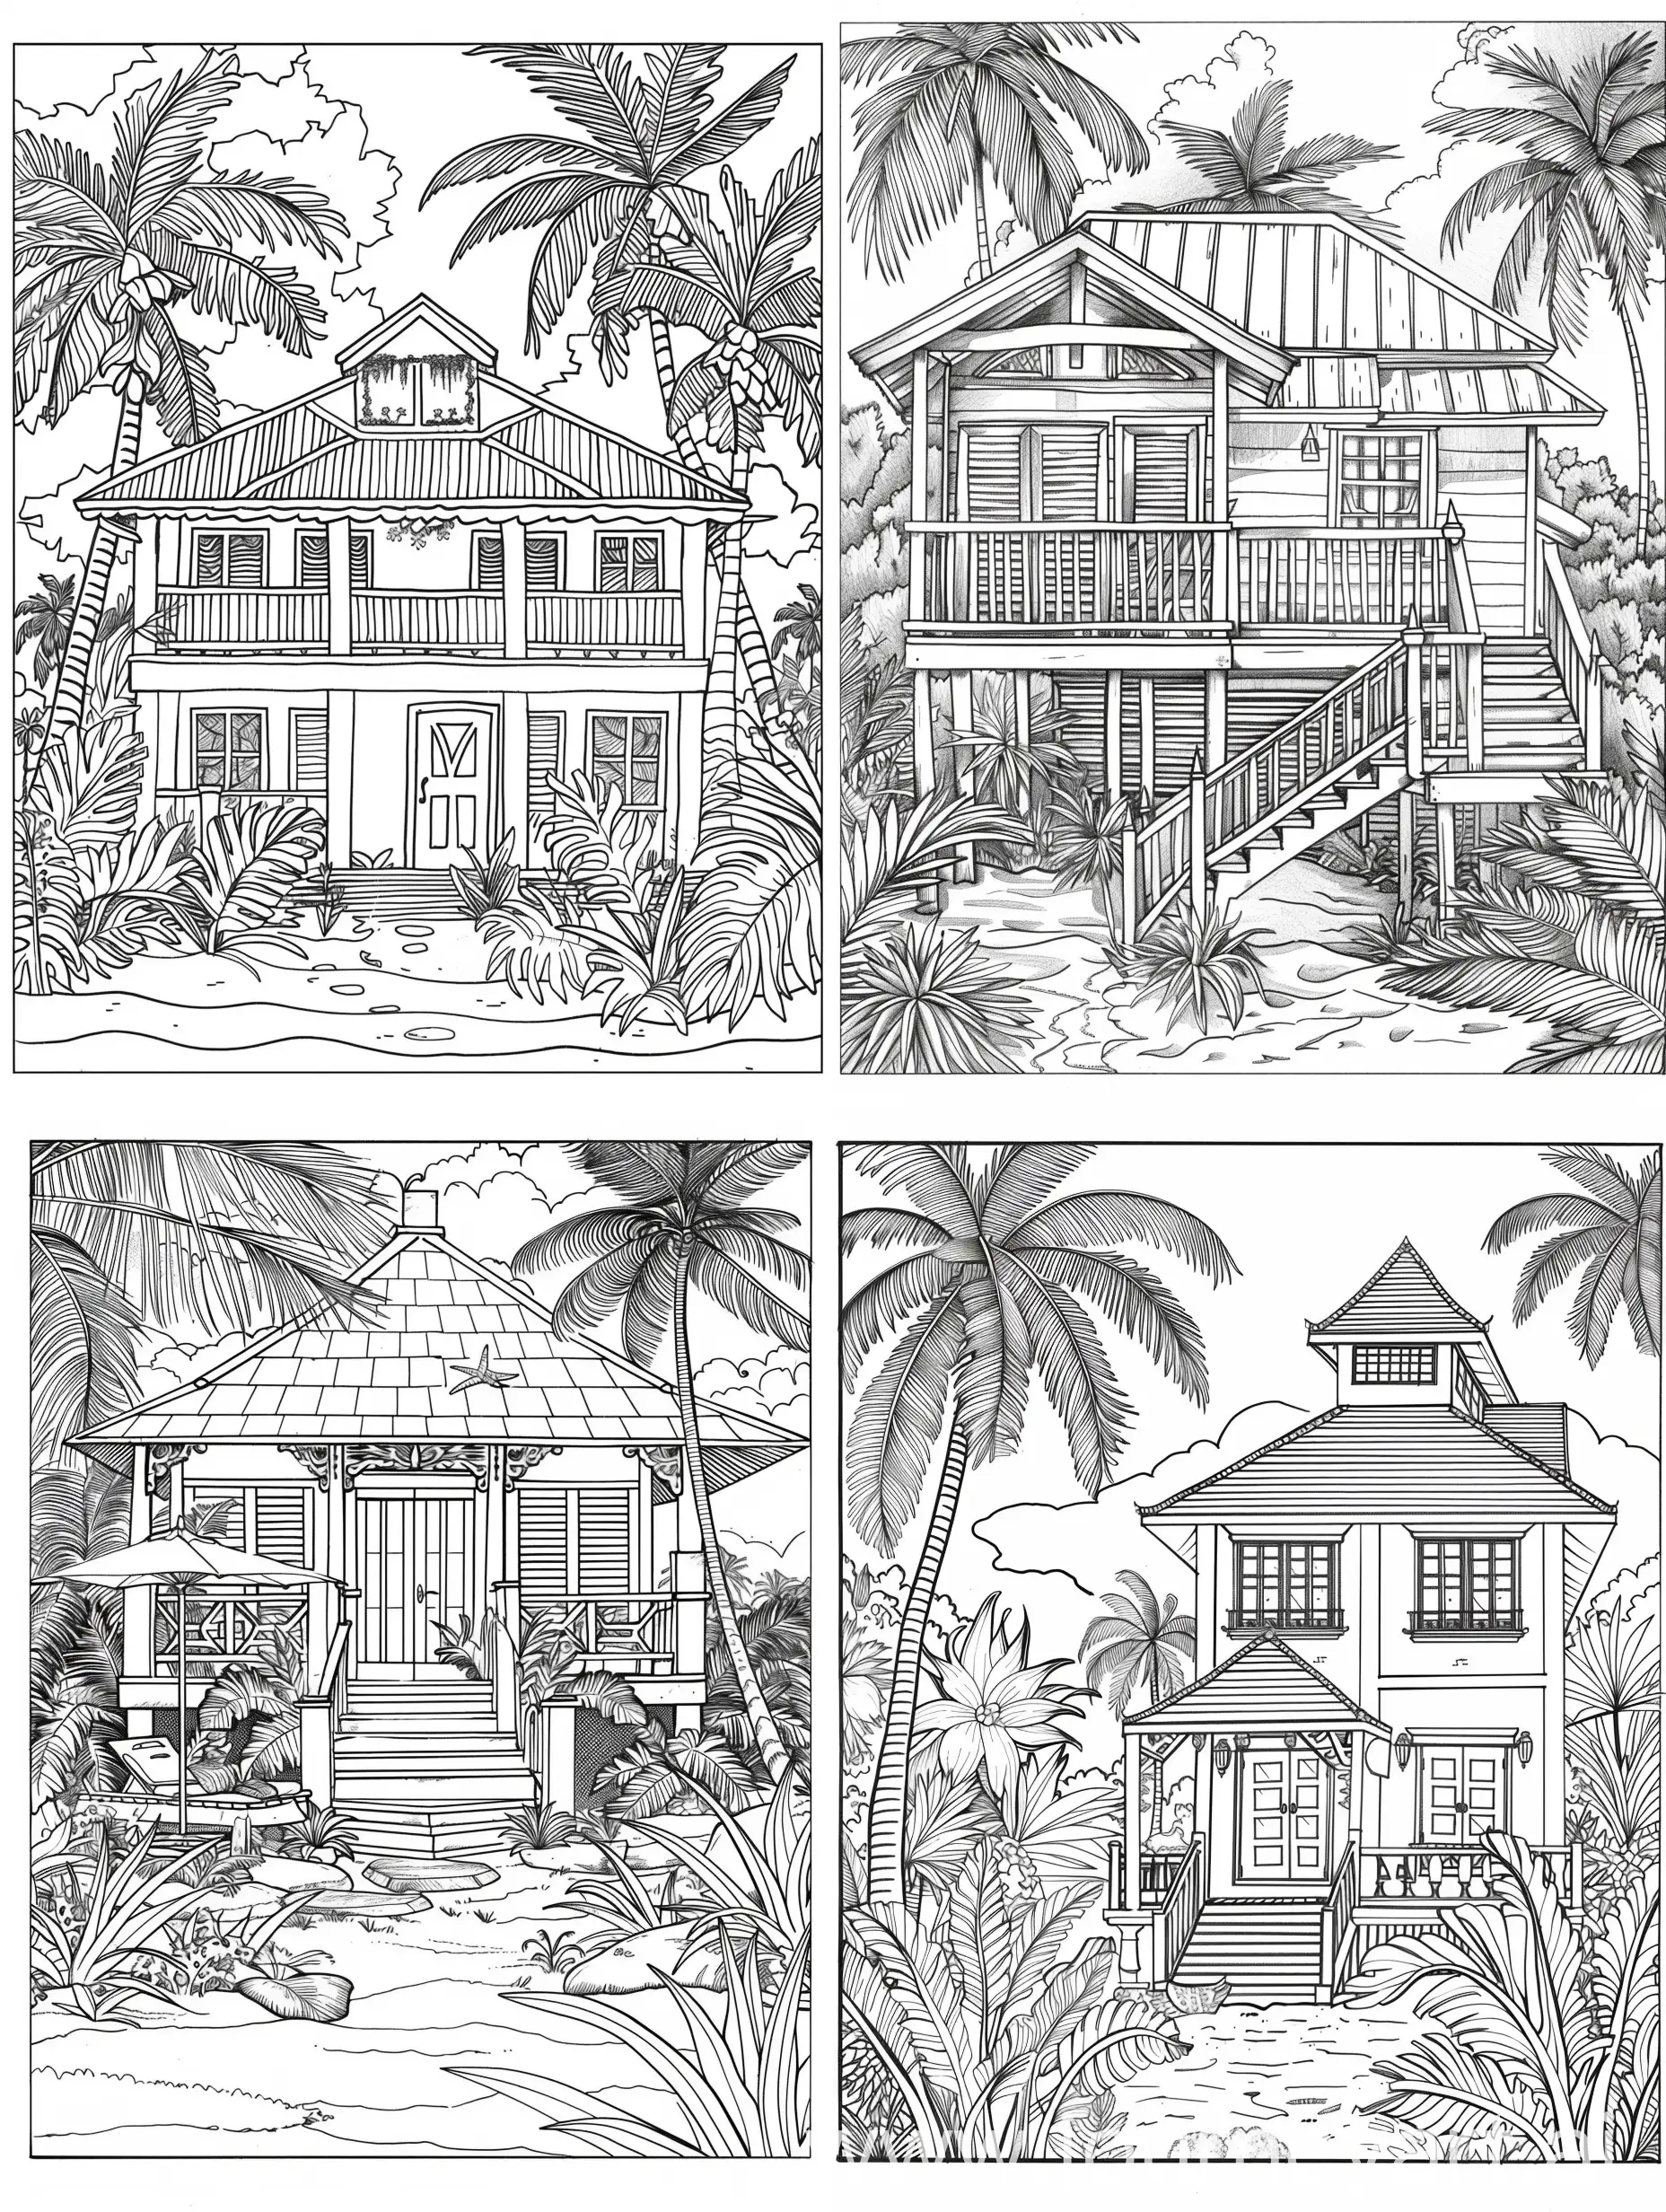 Beachfront-Villa-Coloring-Page-Tranquil-Scene-in-Black-and-White